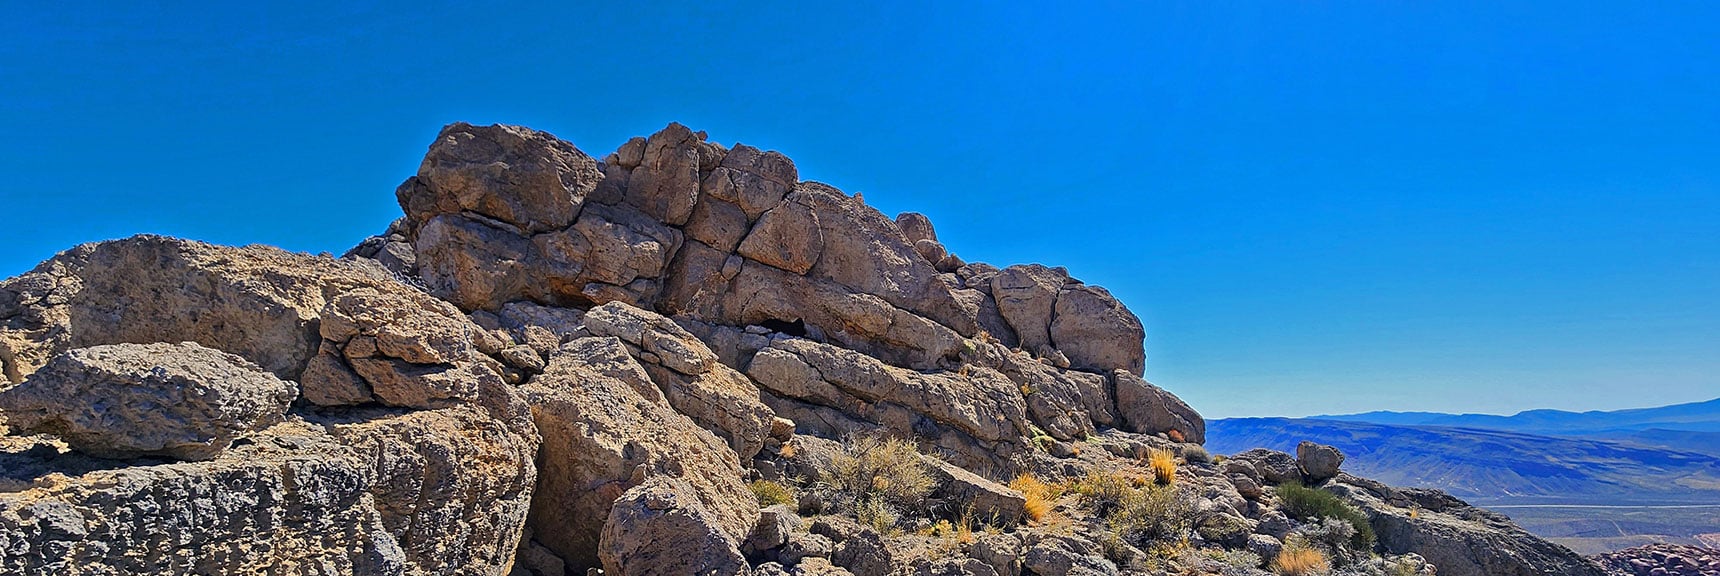 Continuing Beyond SE Summit, Just Descended This Brief Rock Scramble. | Gray Cap Ridge / Brownstone Basin Loop | La Madre Mountains Wilderness, Nevada